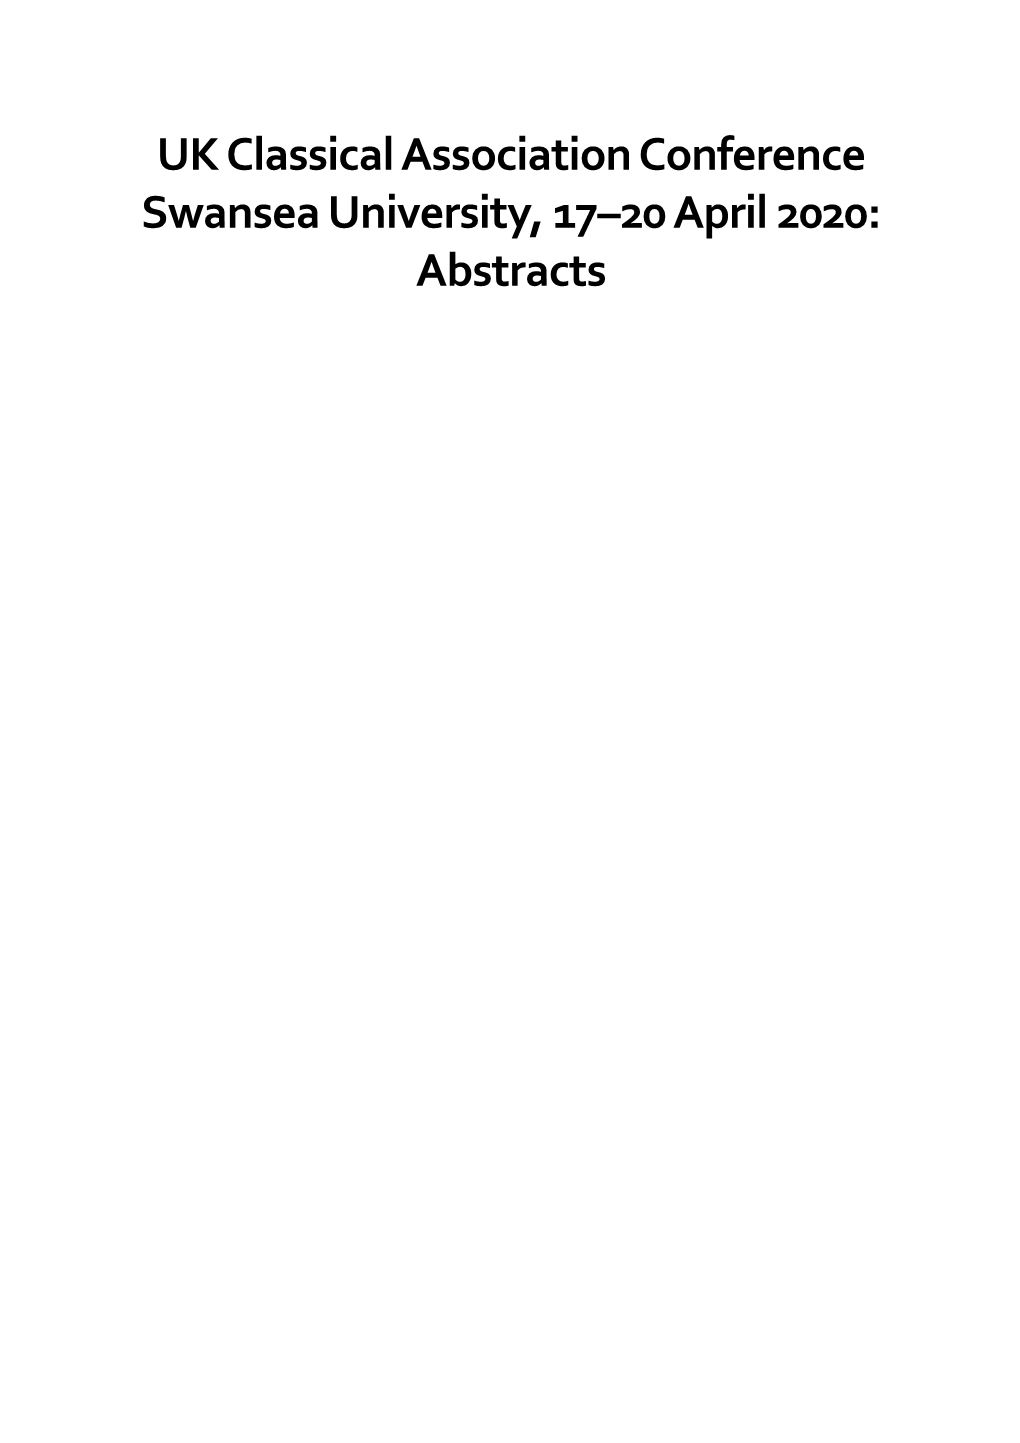 UK Classical Association Conference Swansea University, 17–20 April 2020: Abstracts